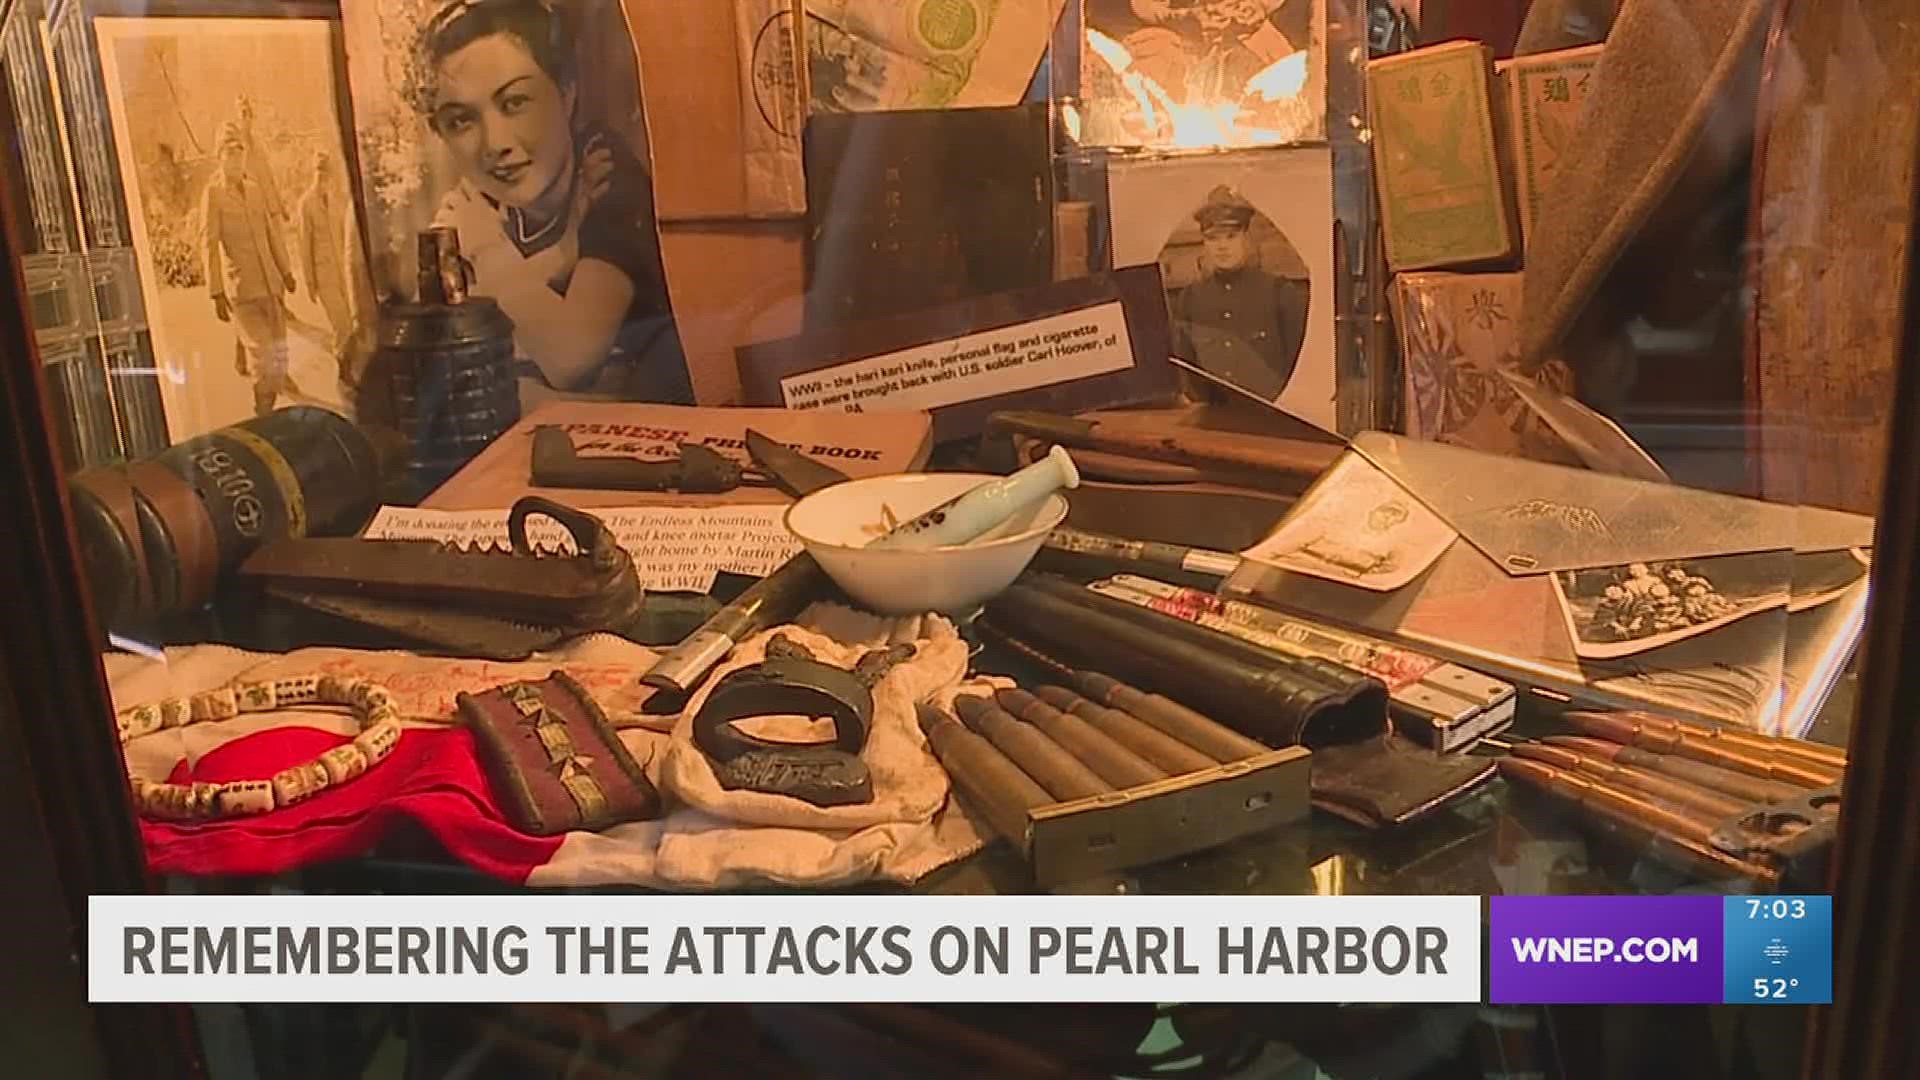 The Endless Mountains Museum and War Memorial in Sullivan County displays artifacts from nearly every major American involved war in the past century.